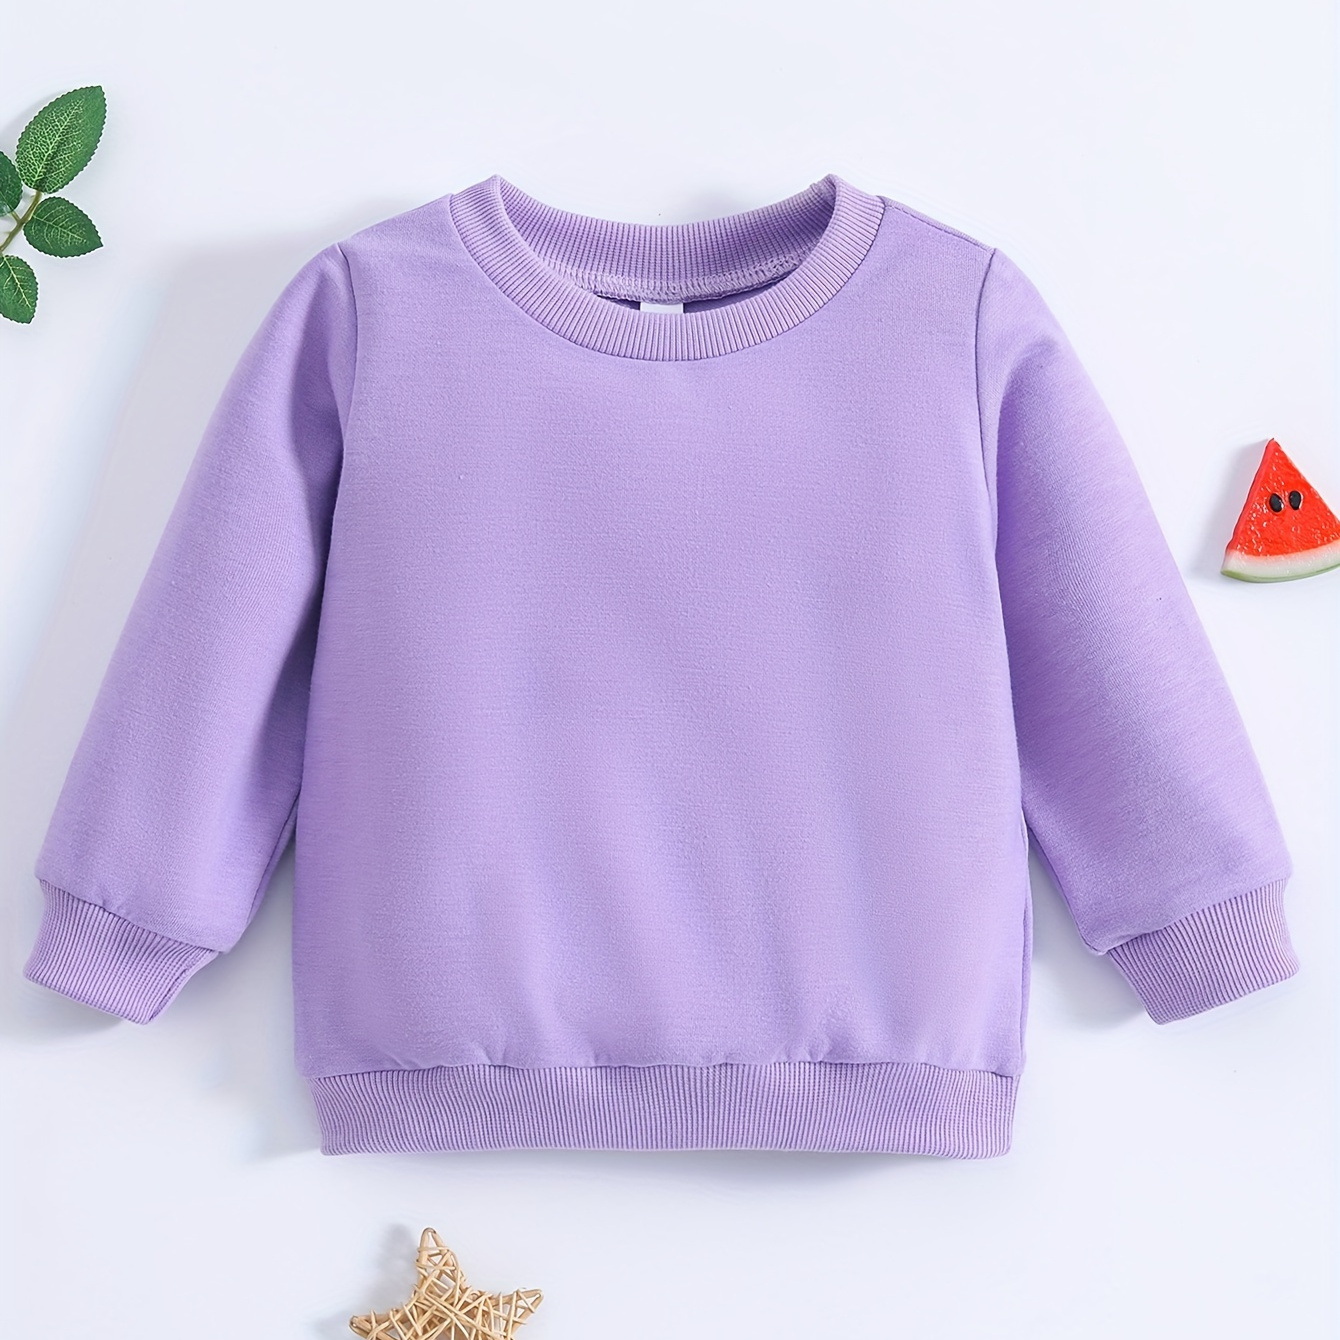 

Solid Color Sweatshirt For Infants & Toddlers, Casual Long Sleeve Top, Baby Boy's Clothing